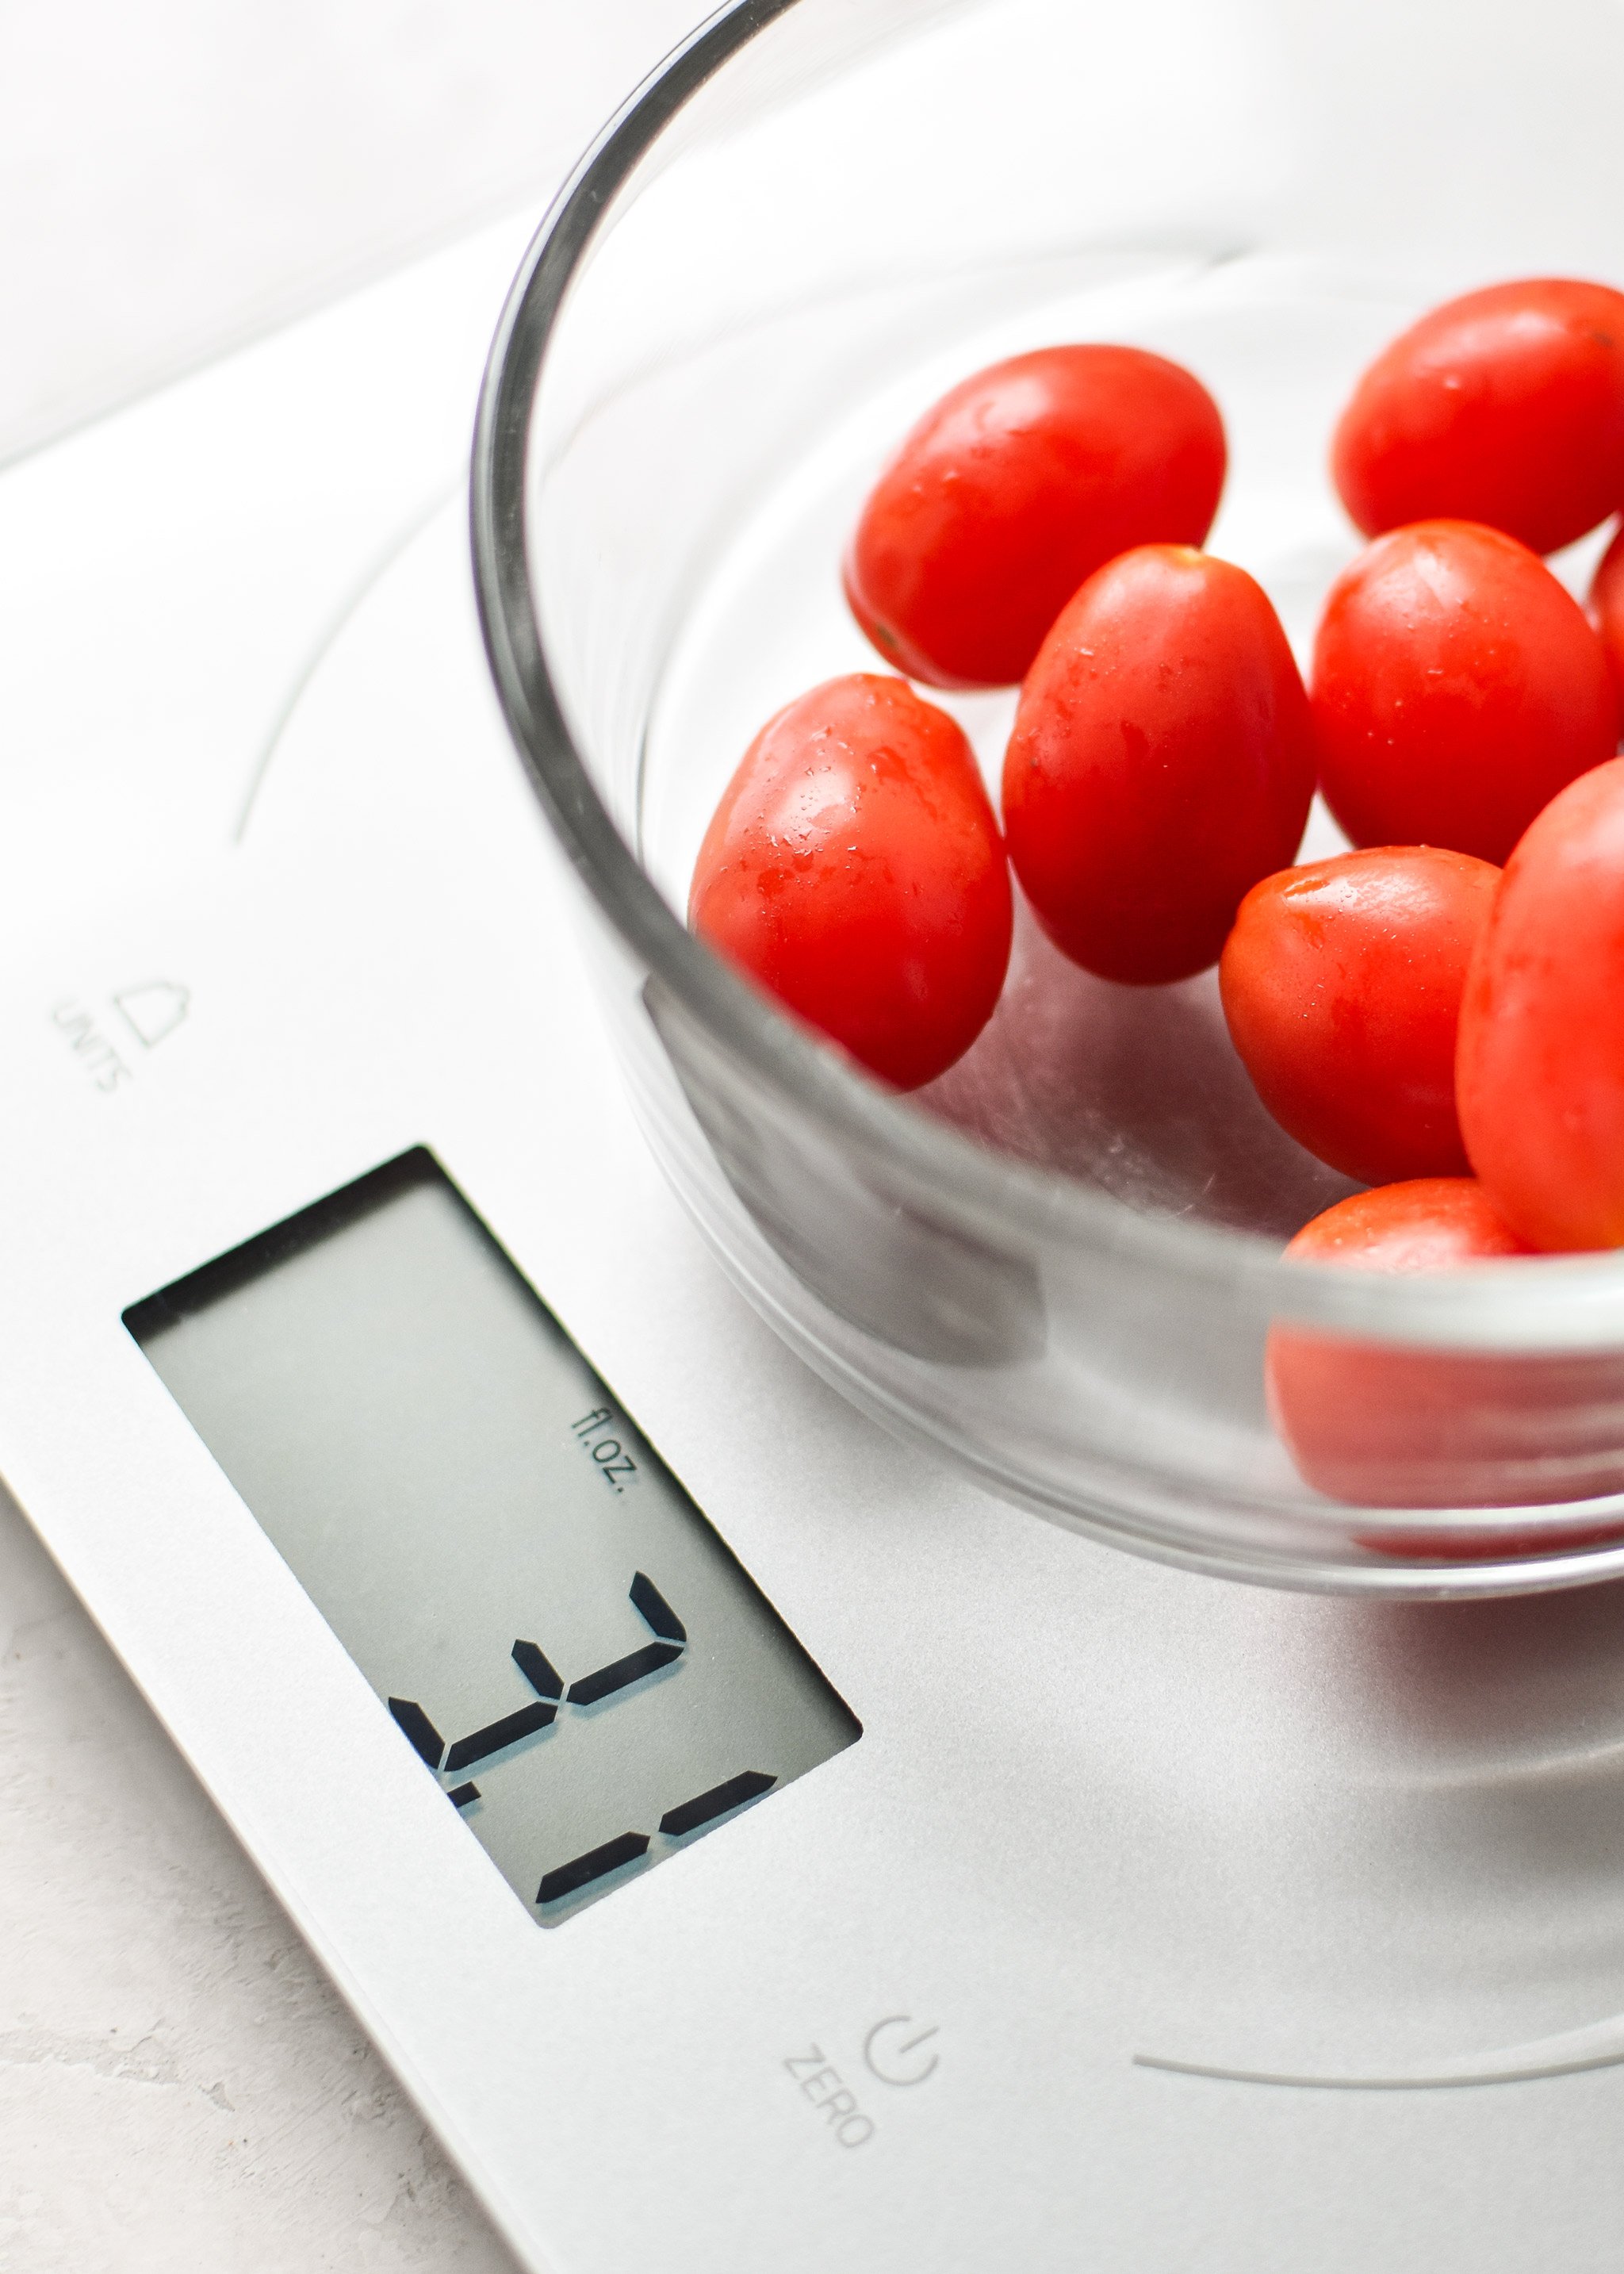 Portioning grape tomatoes for meal prep using a kitchen scale.